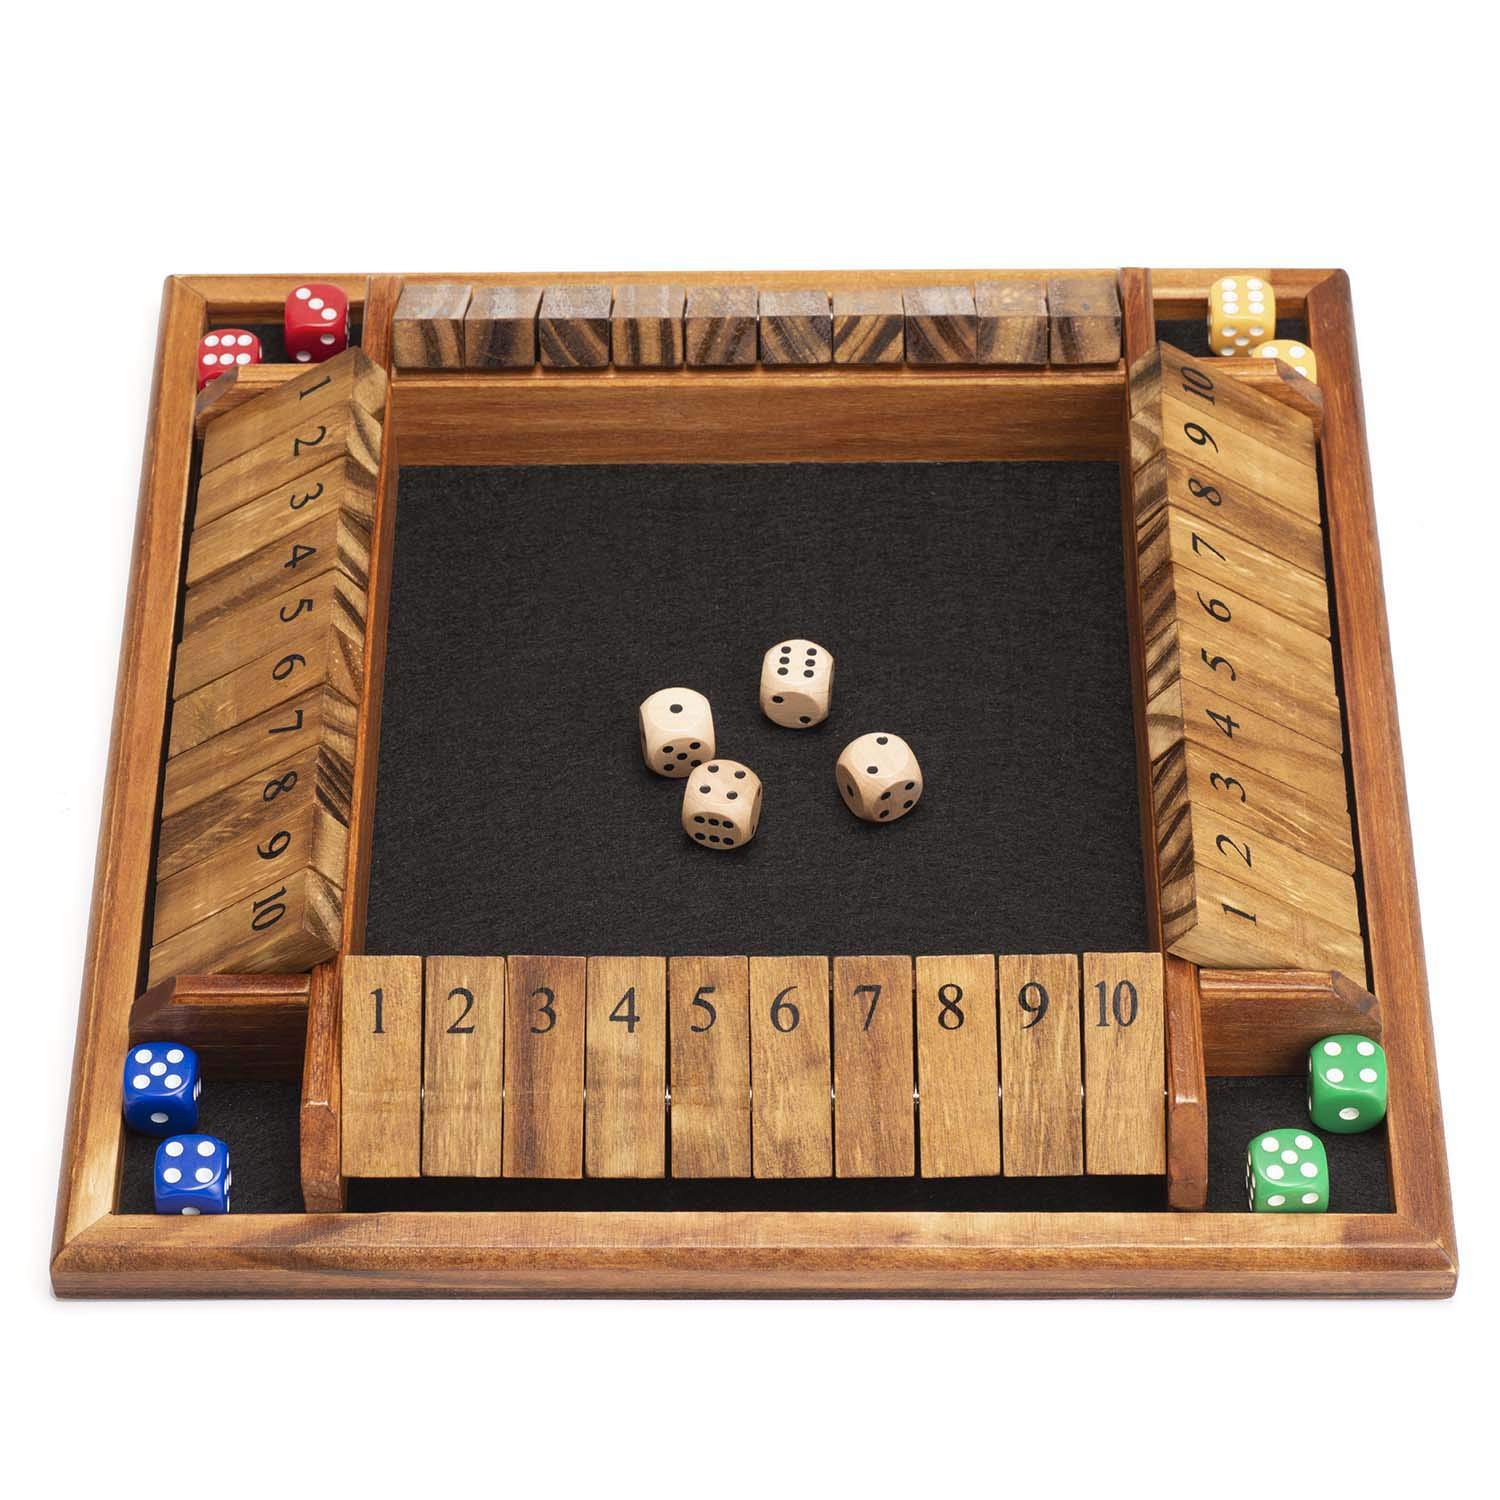 AMEROUS 1-4 Players Shut The Box Dice Game, Wooden Board Table Math Game with 12 Dice and Shut-The-Box Instructions for Kids Adults, Family Classroom Home or Pub (12 Inches)